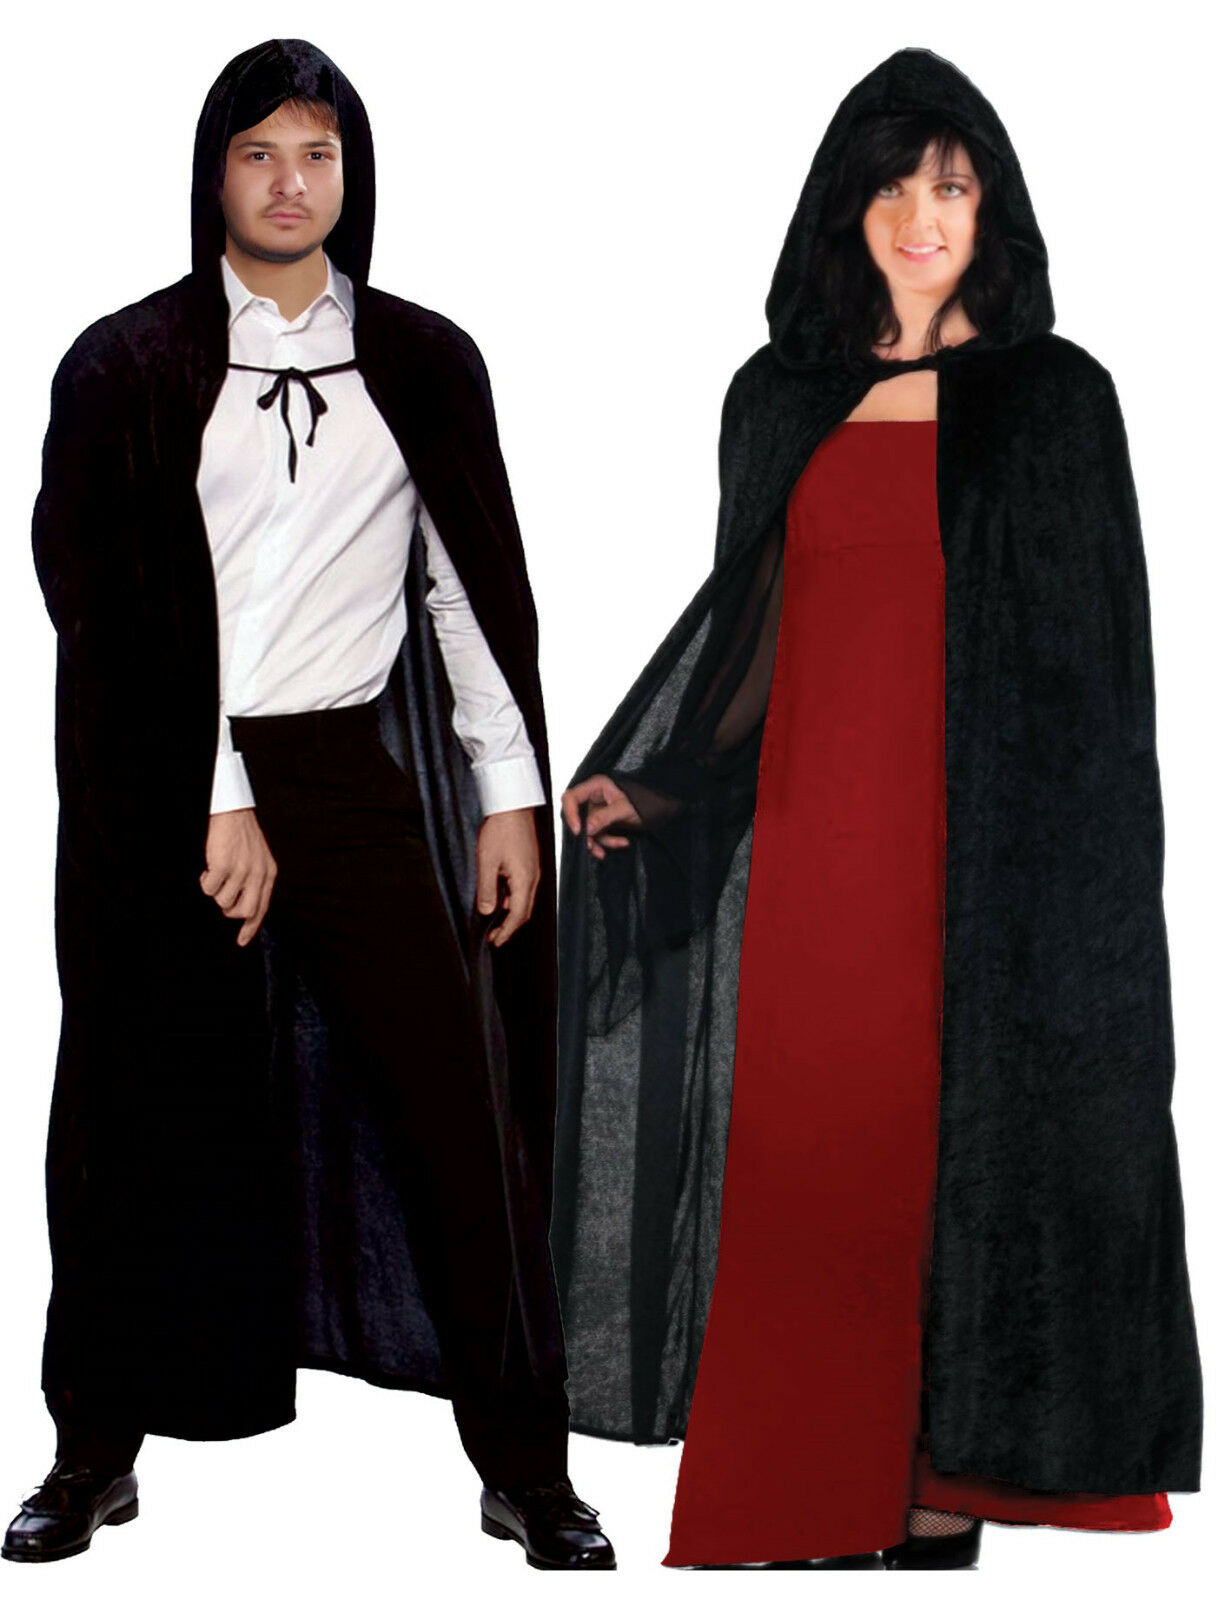 Adults Unisex Black Hooded Cape. This Is Perfect For Halloween Or Cosplay Events. This Is A One Size Fits All.